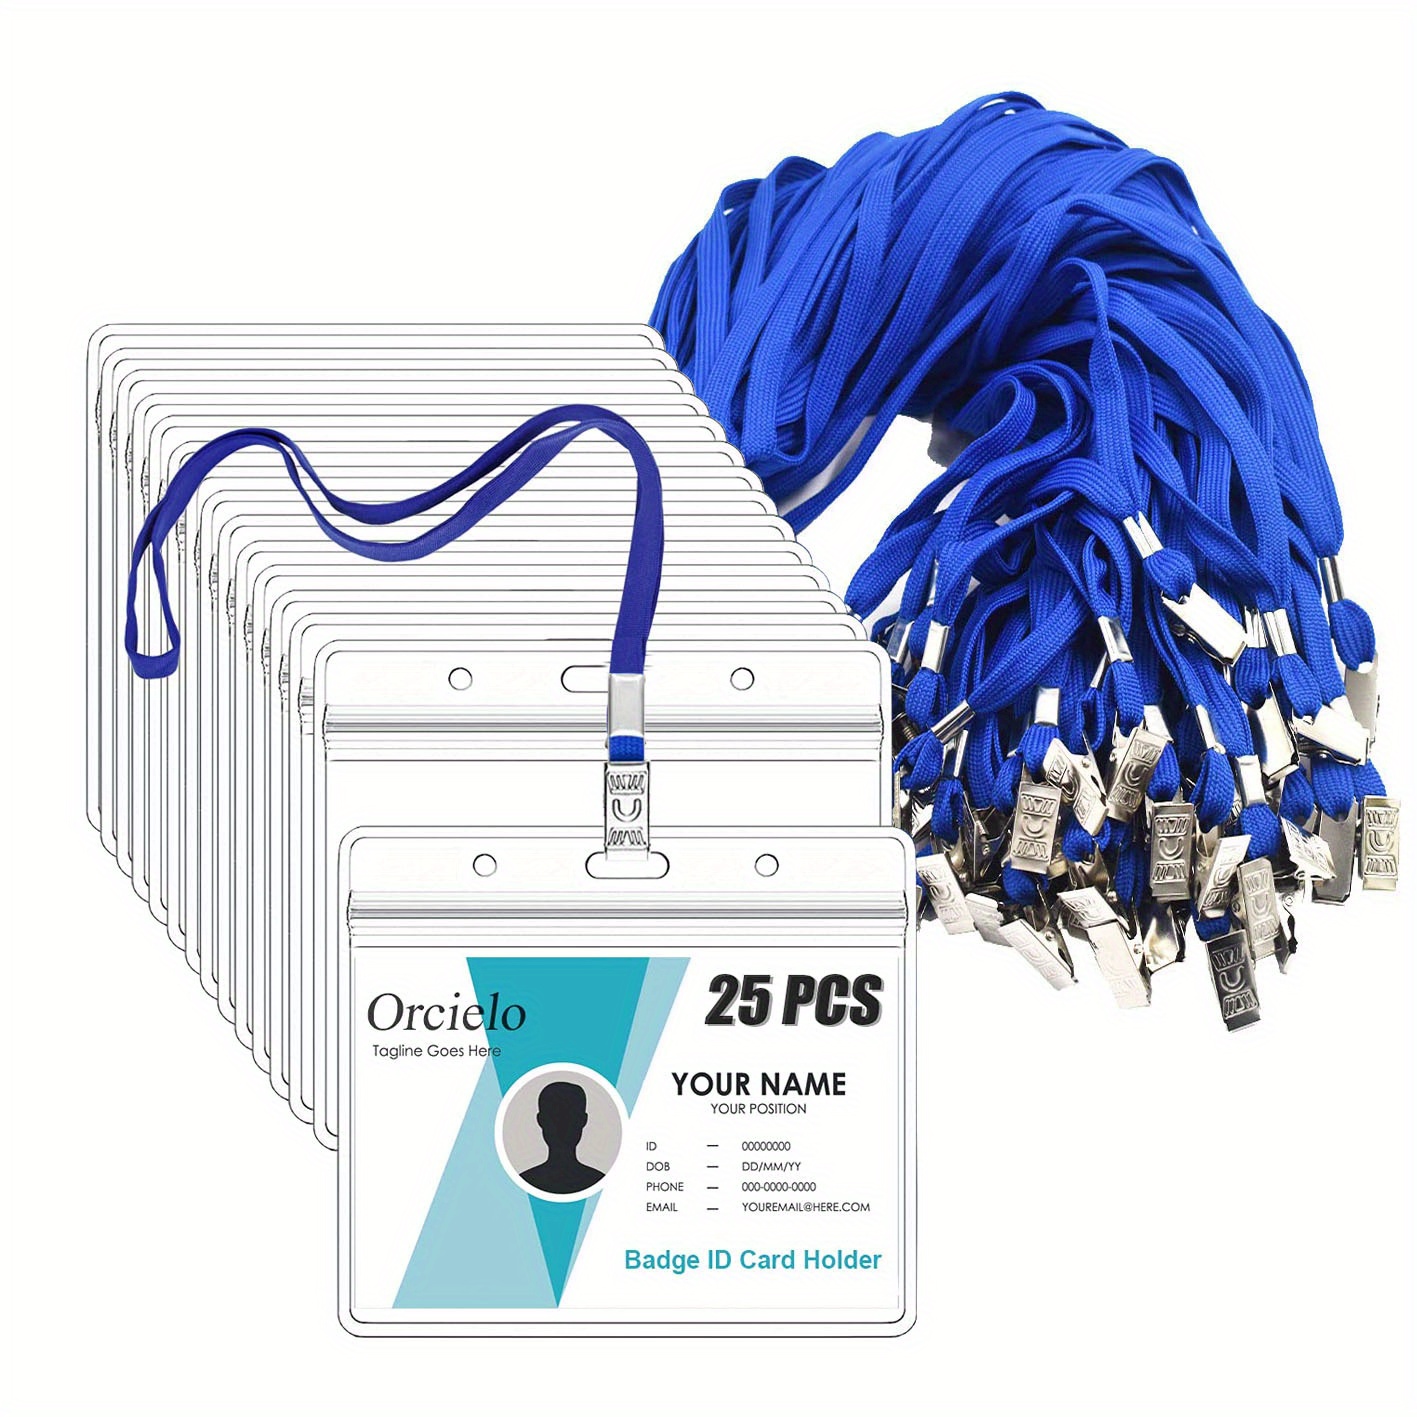 25pcs Badge Holder With Lanyard, Blue Lanyards For Horizontal ID Badges,Clear ID Card Holder With Waterproof Resealable,Bulk Plastic Name Tag